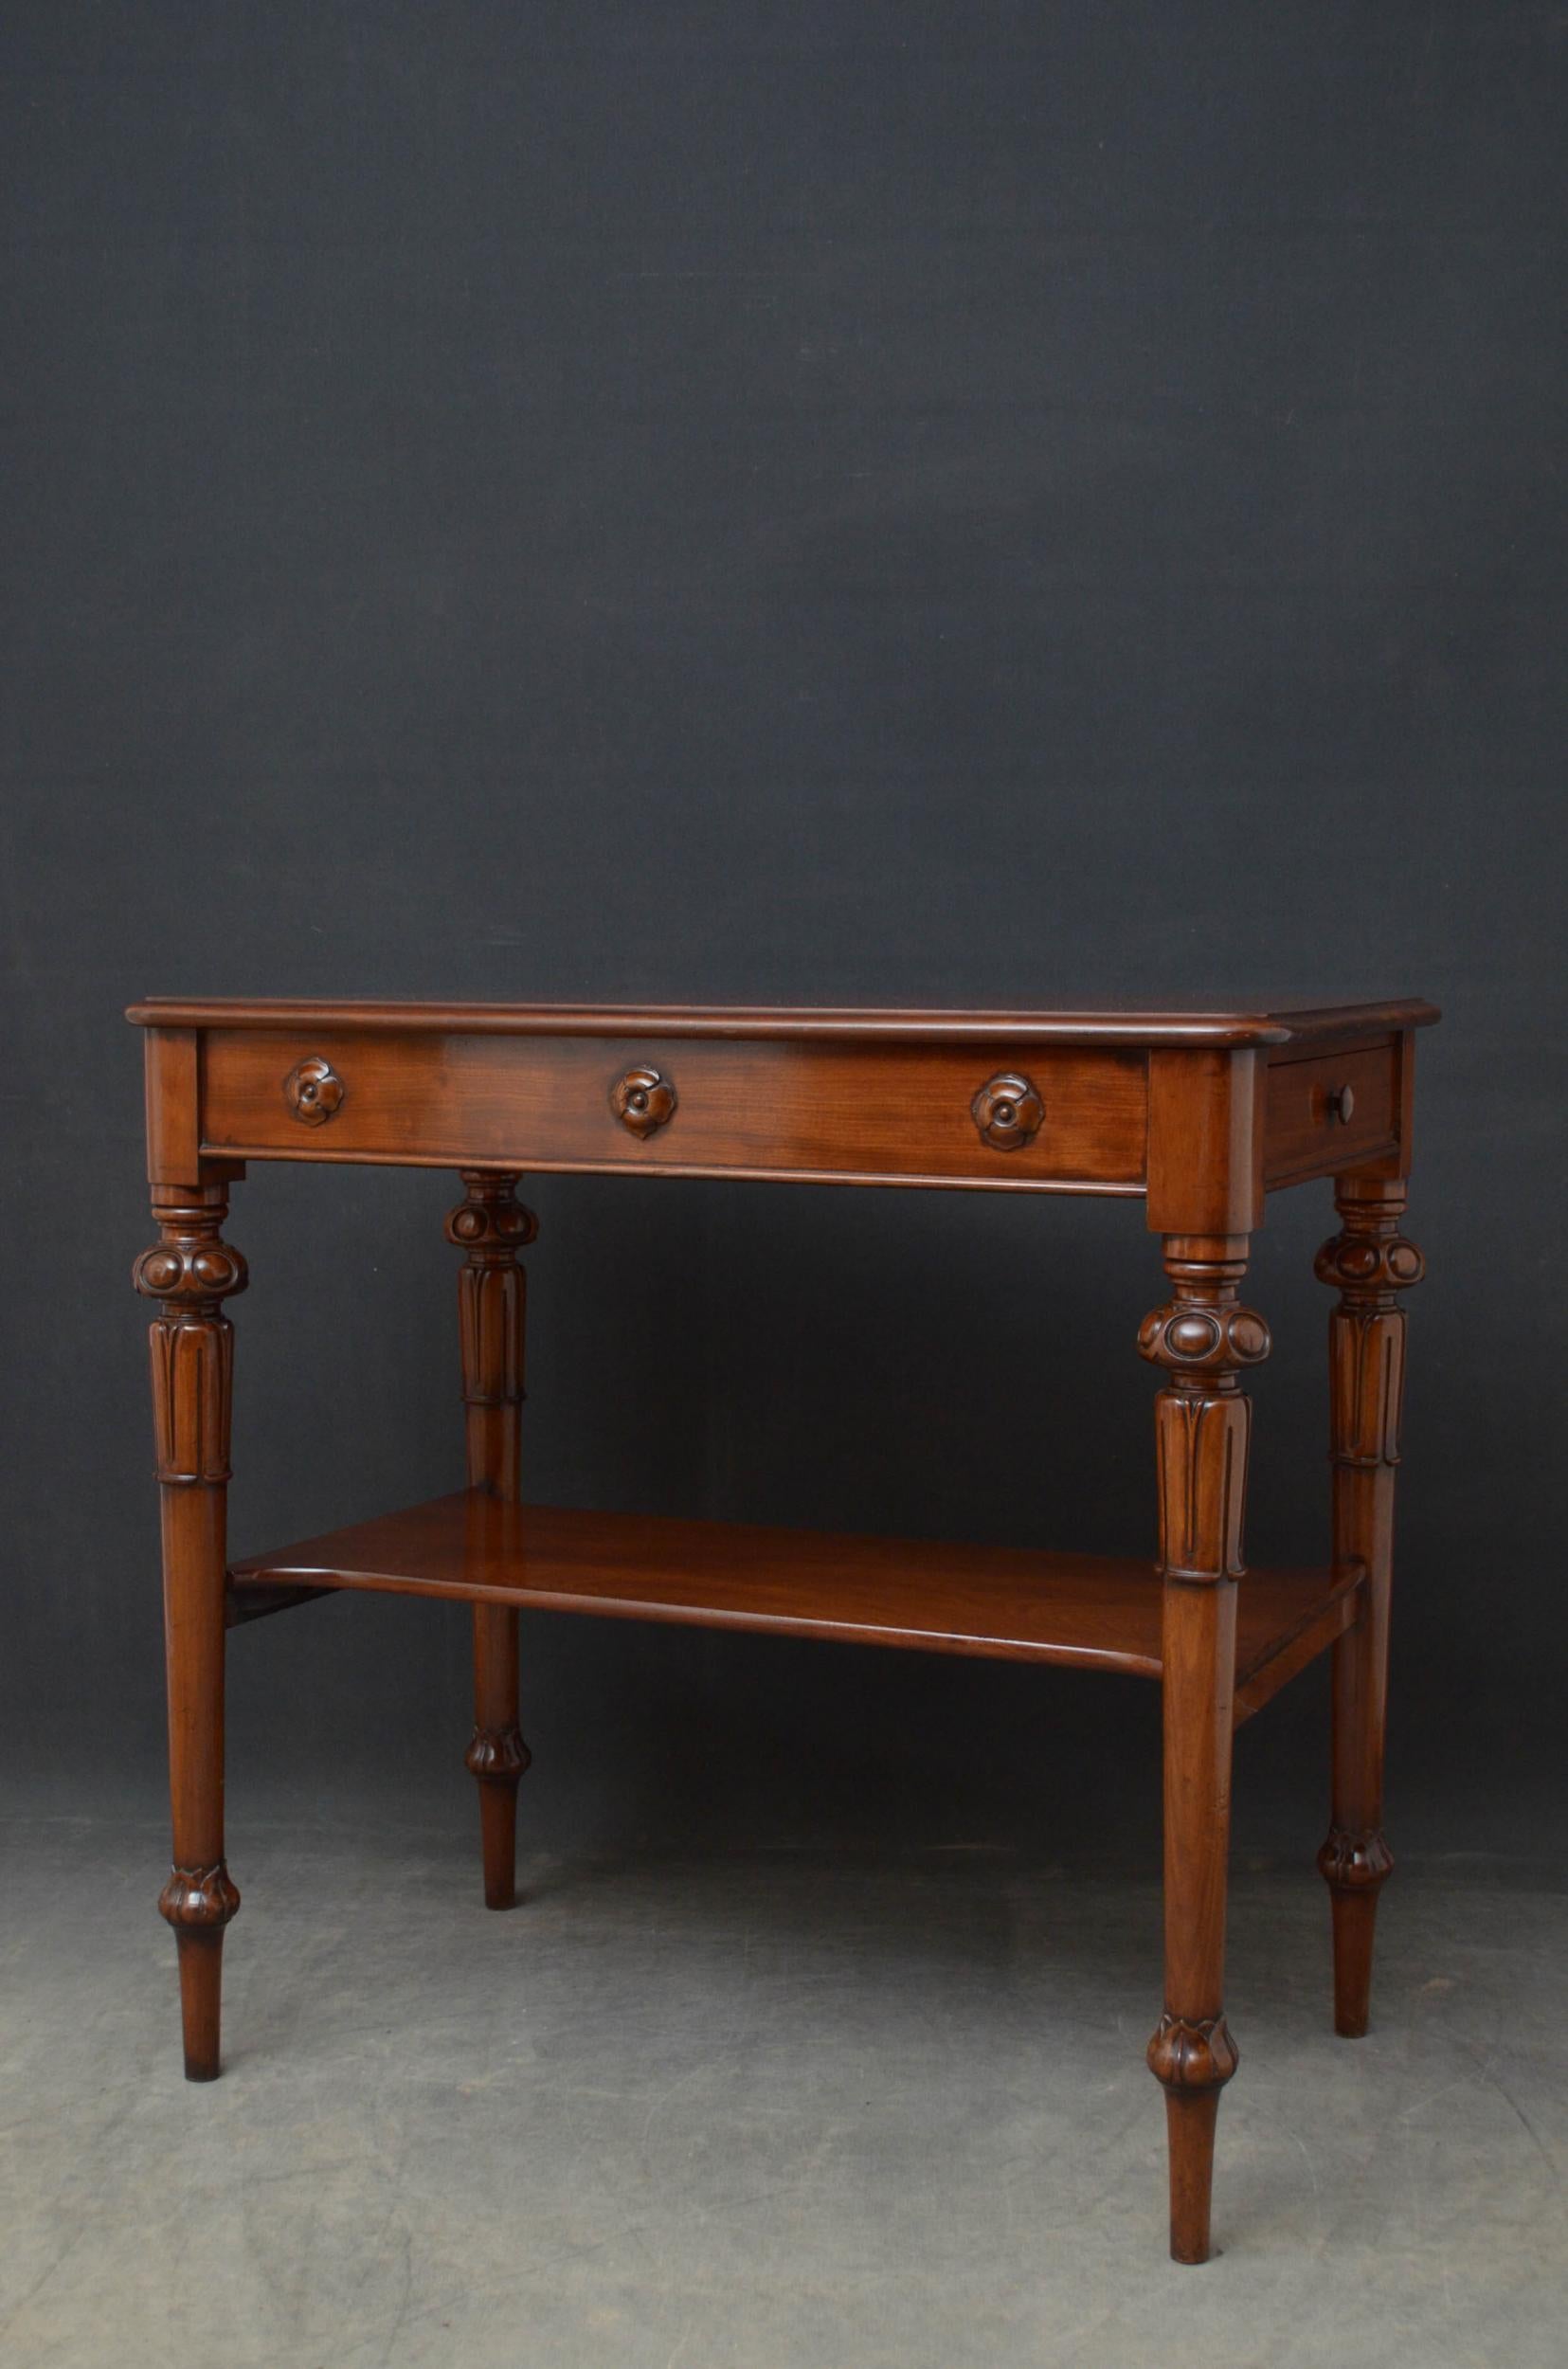 Tall Early Victorian Mahogany Table In Good Condition For Sale In Whaley Bridge, GB